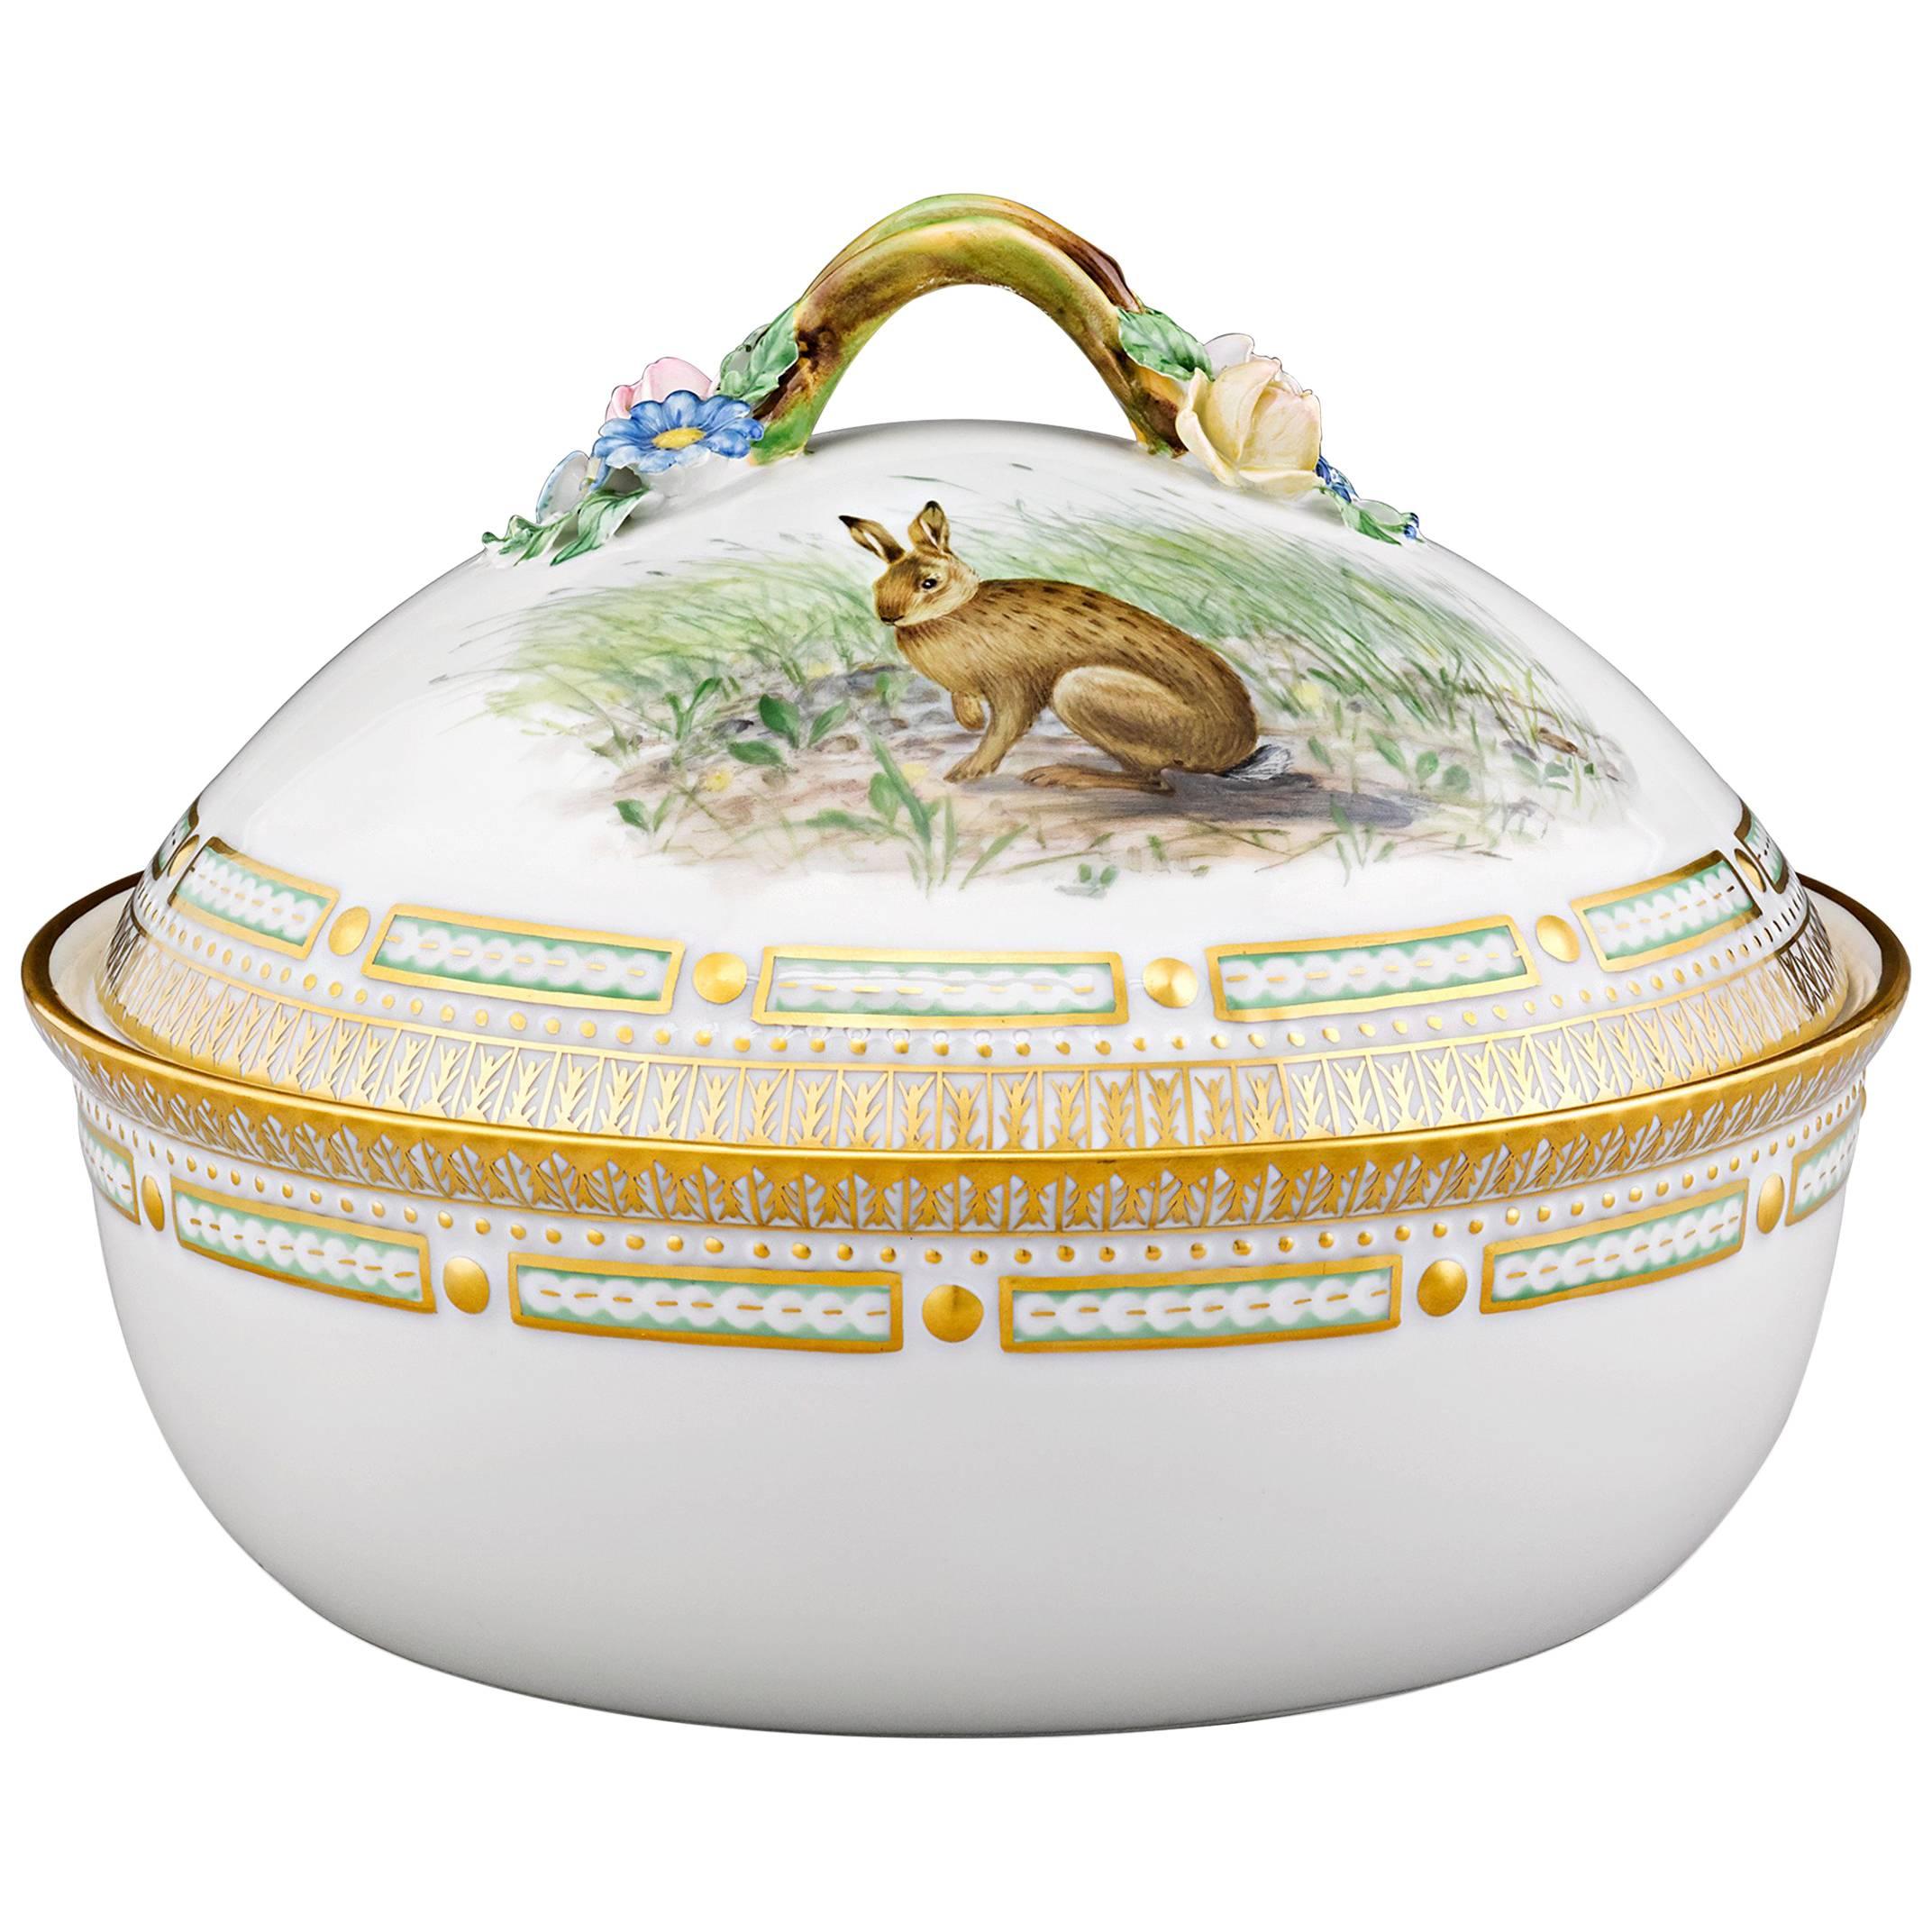 Flora Danica Game Series Covered Vegetable Dish For Sale